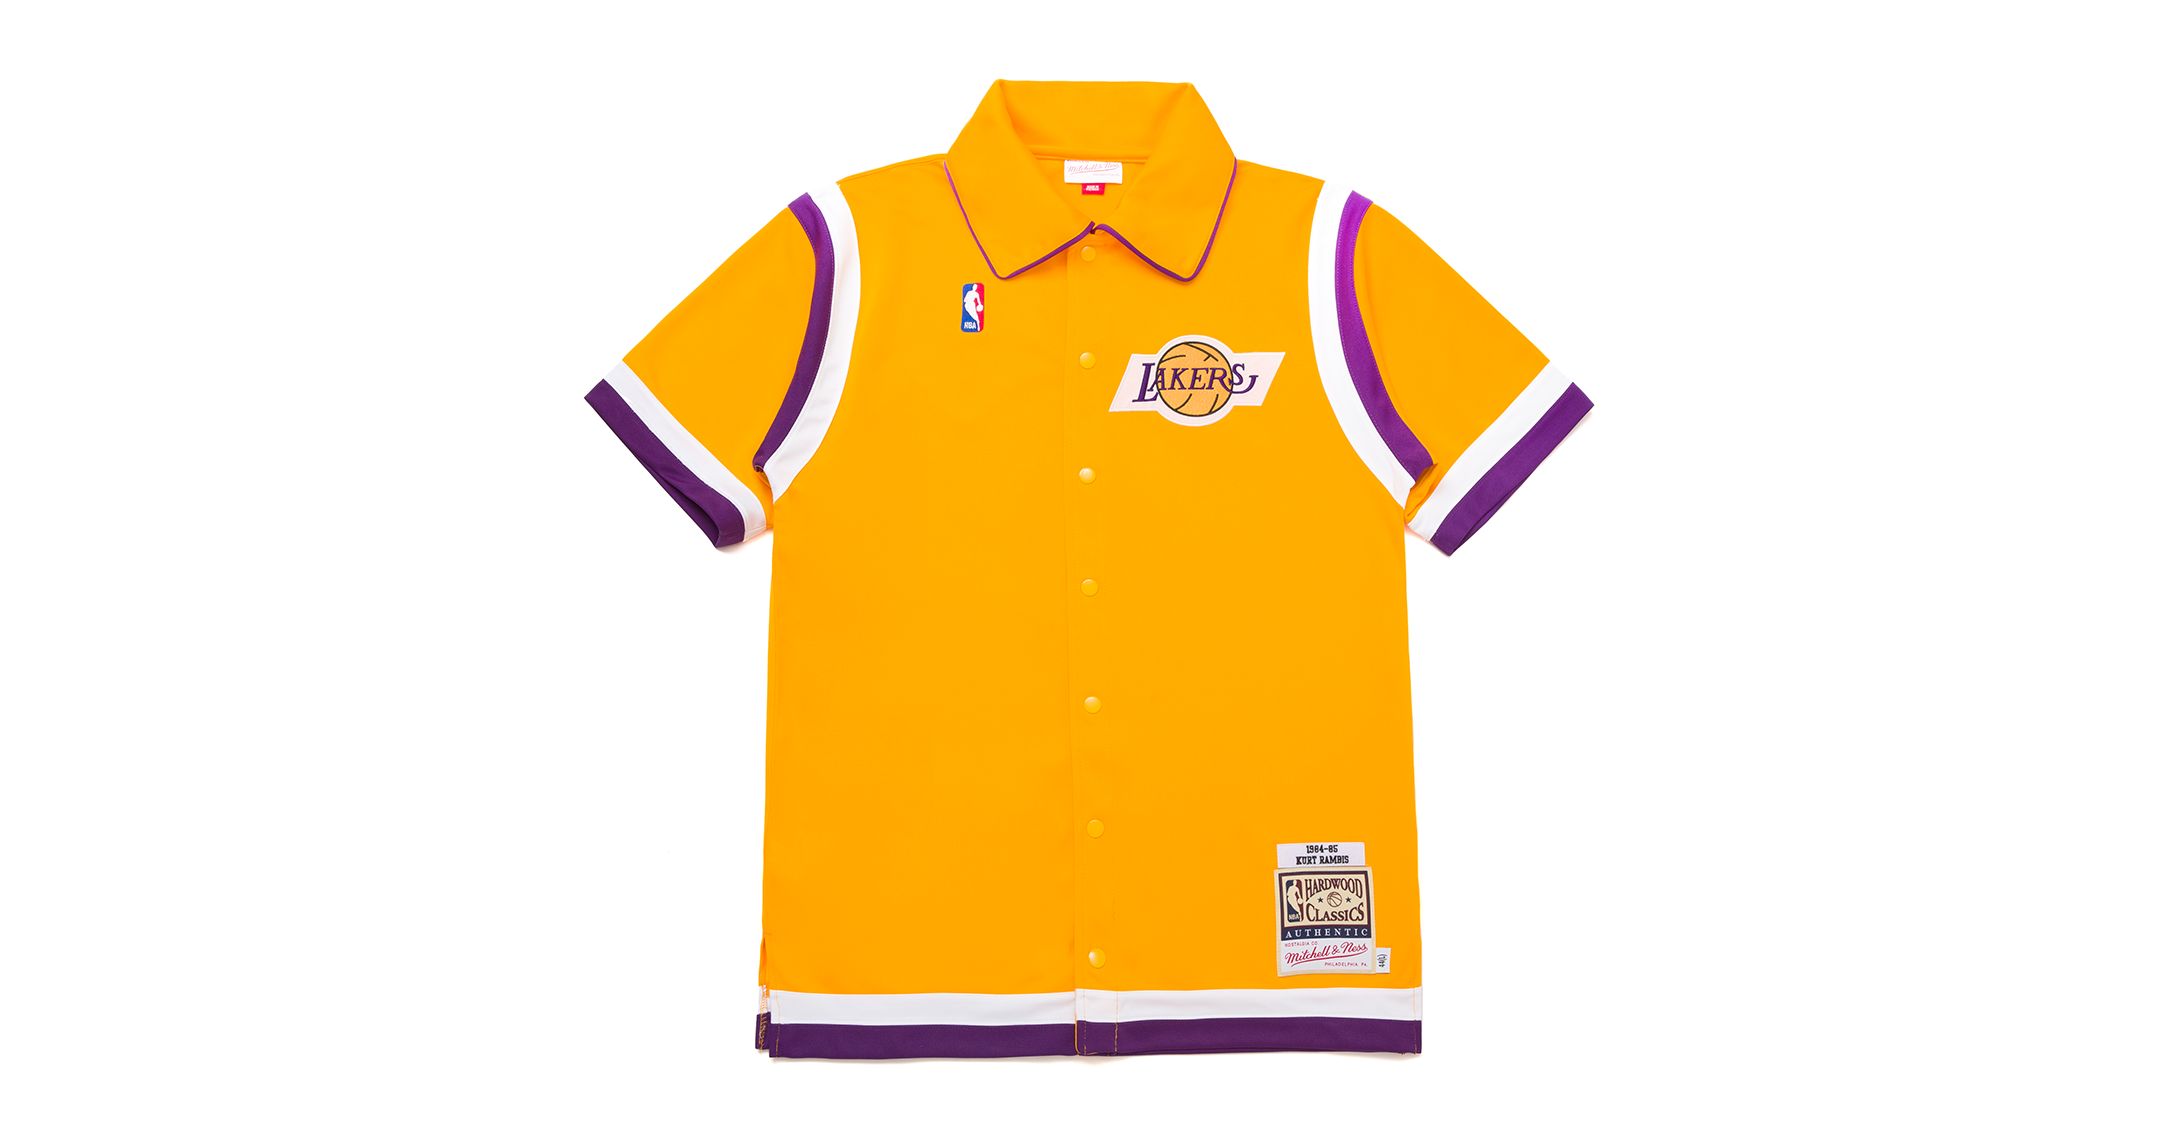 Mitchell & Ness: New Release - Authentic NBA Shooting Shirts